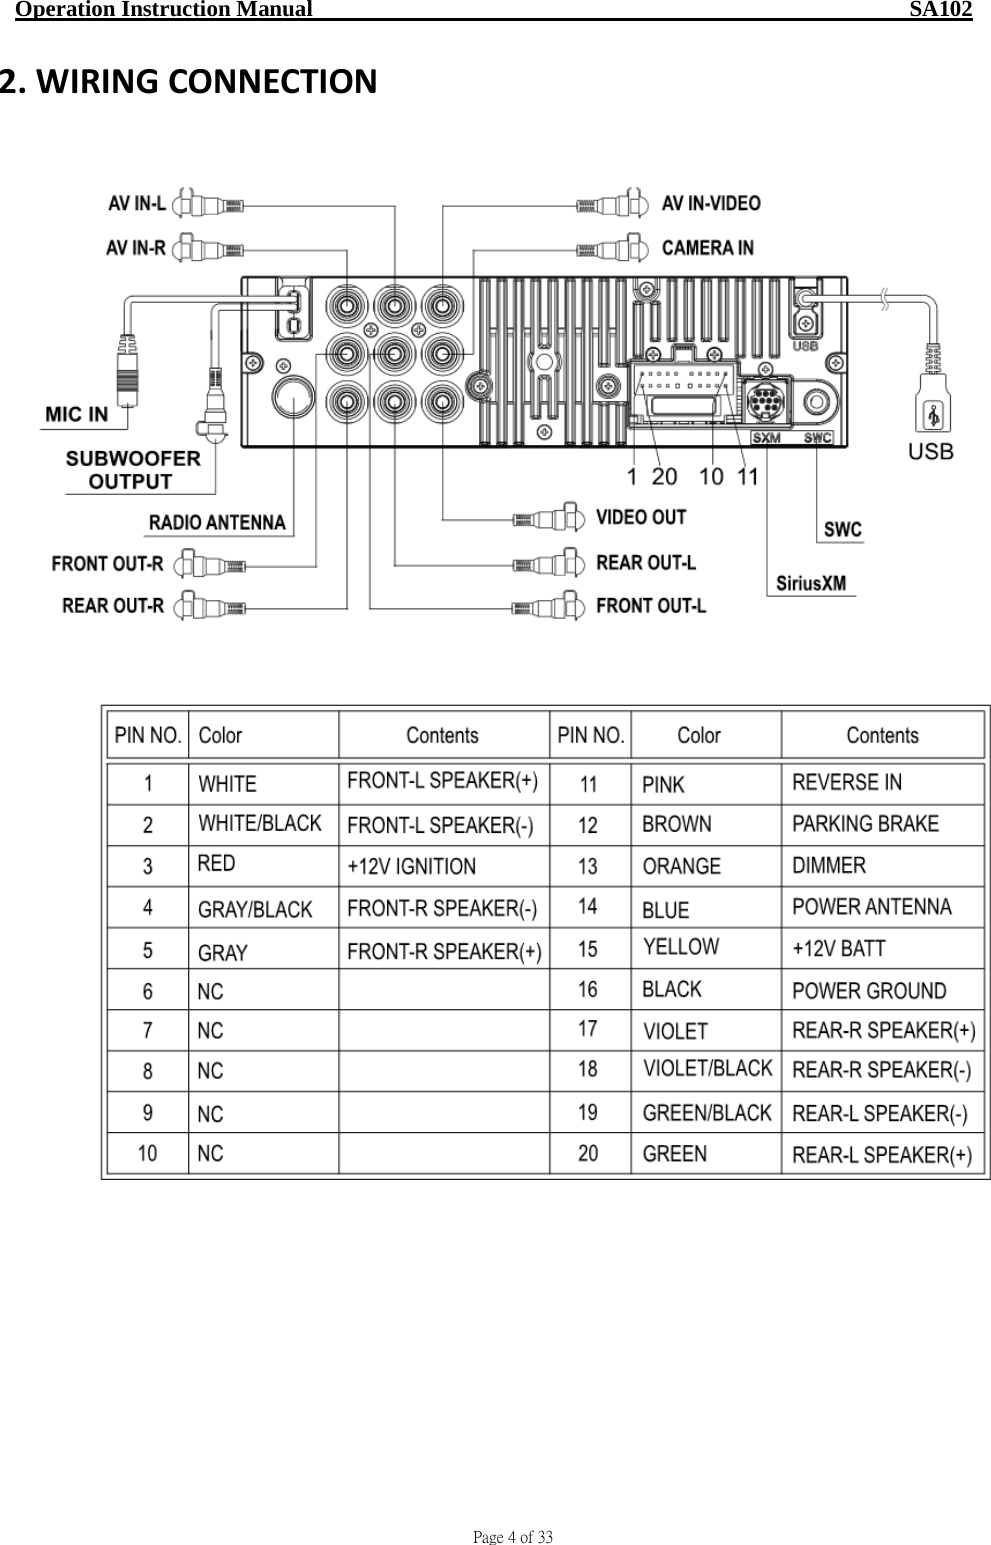                                     Page 4 of 33  Operation Instruction Manual                                                    SA102 2. WIRING CONNECTION                